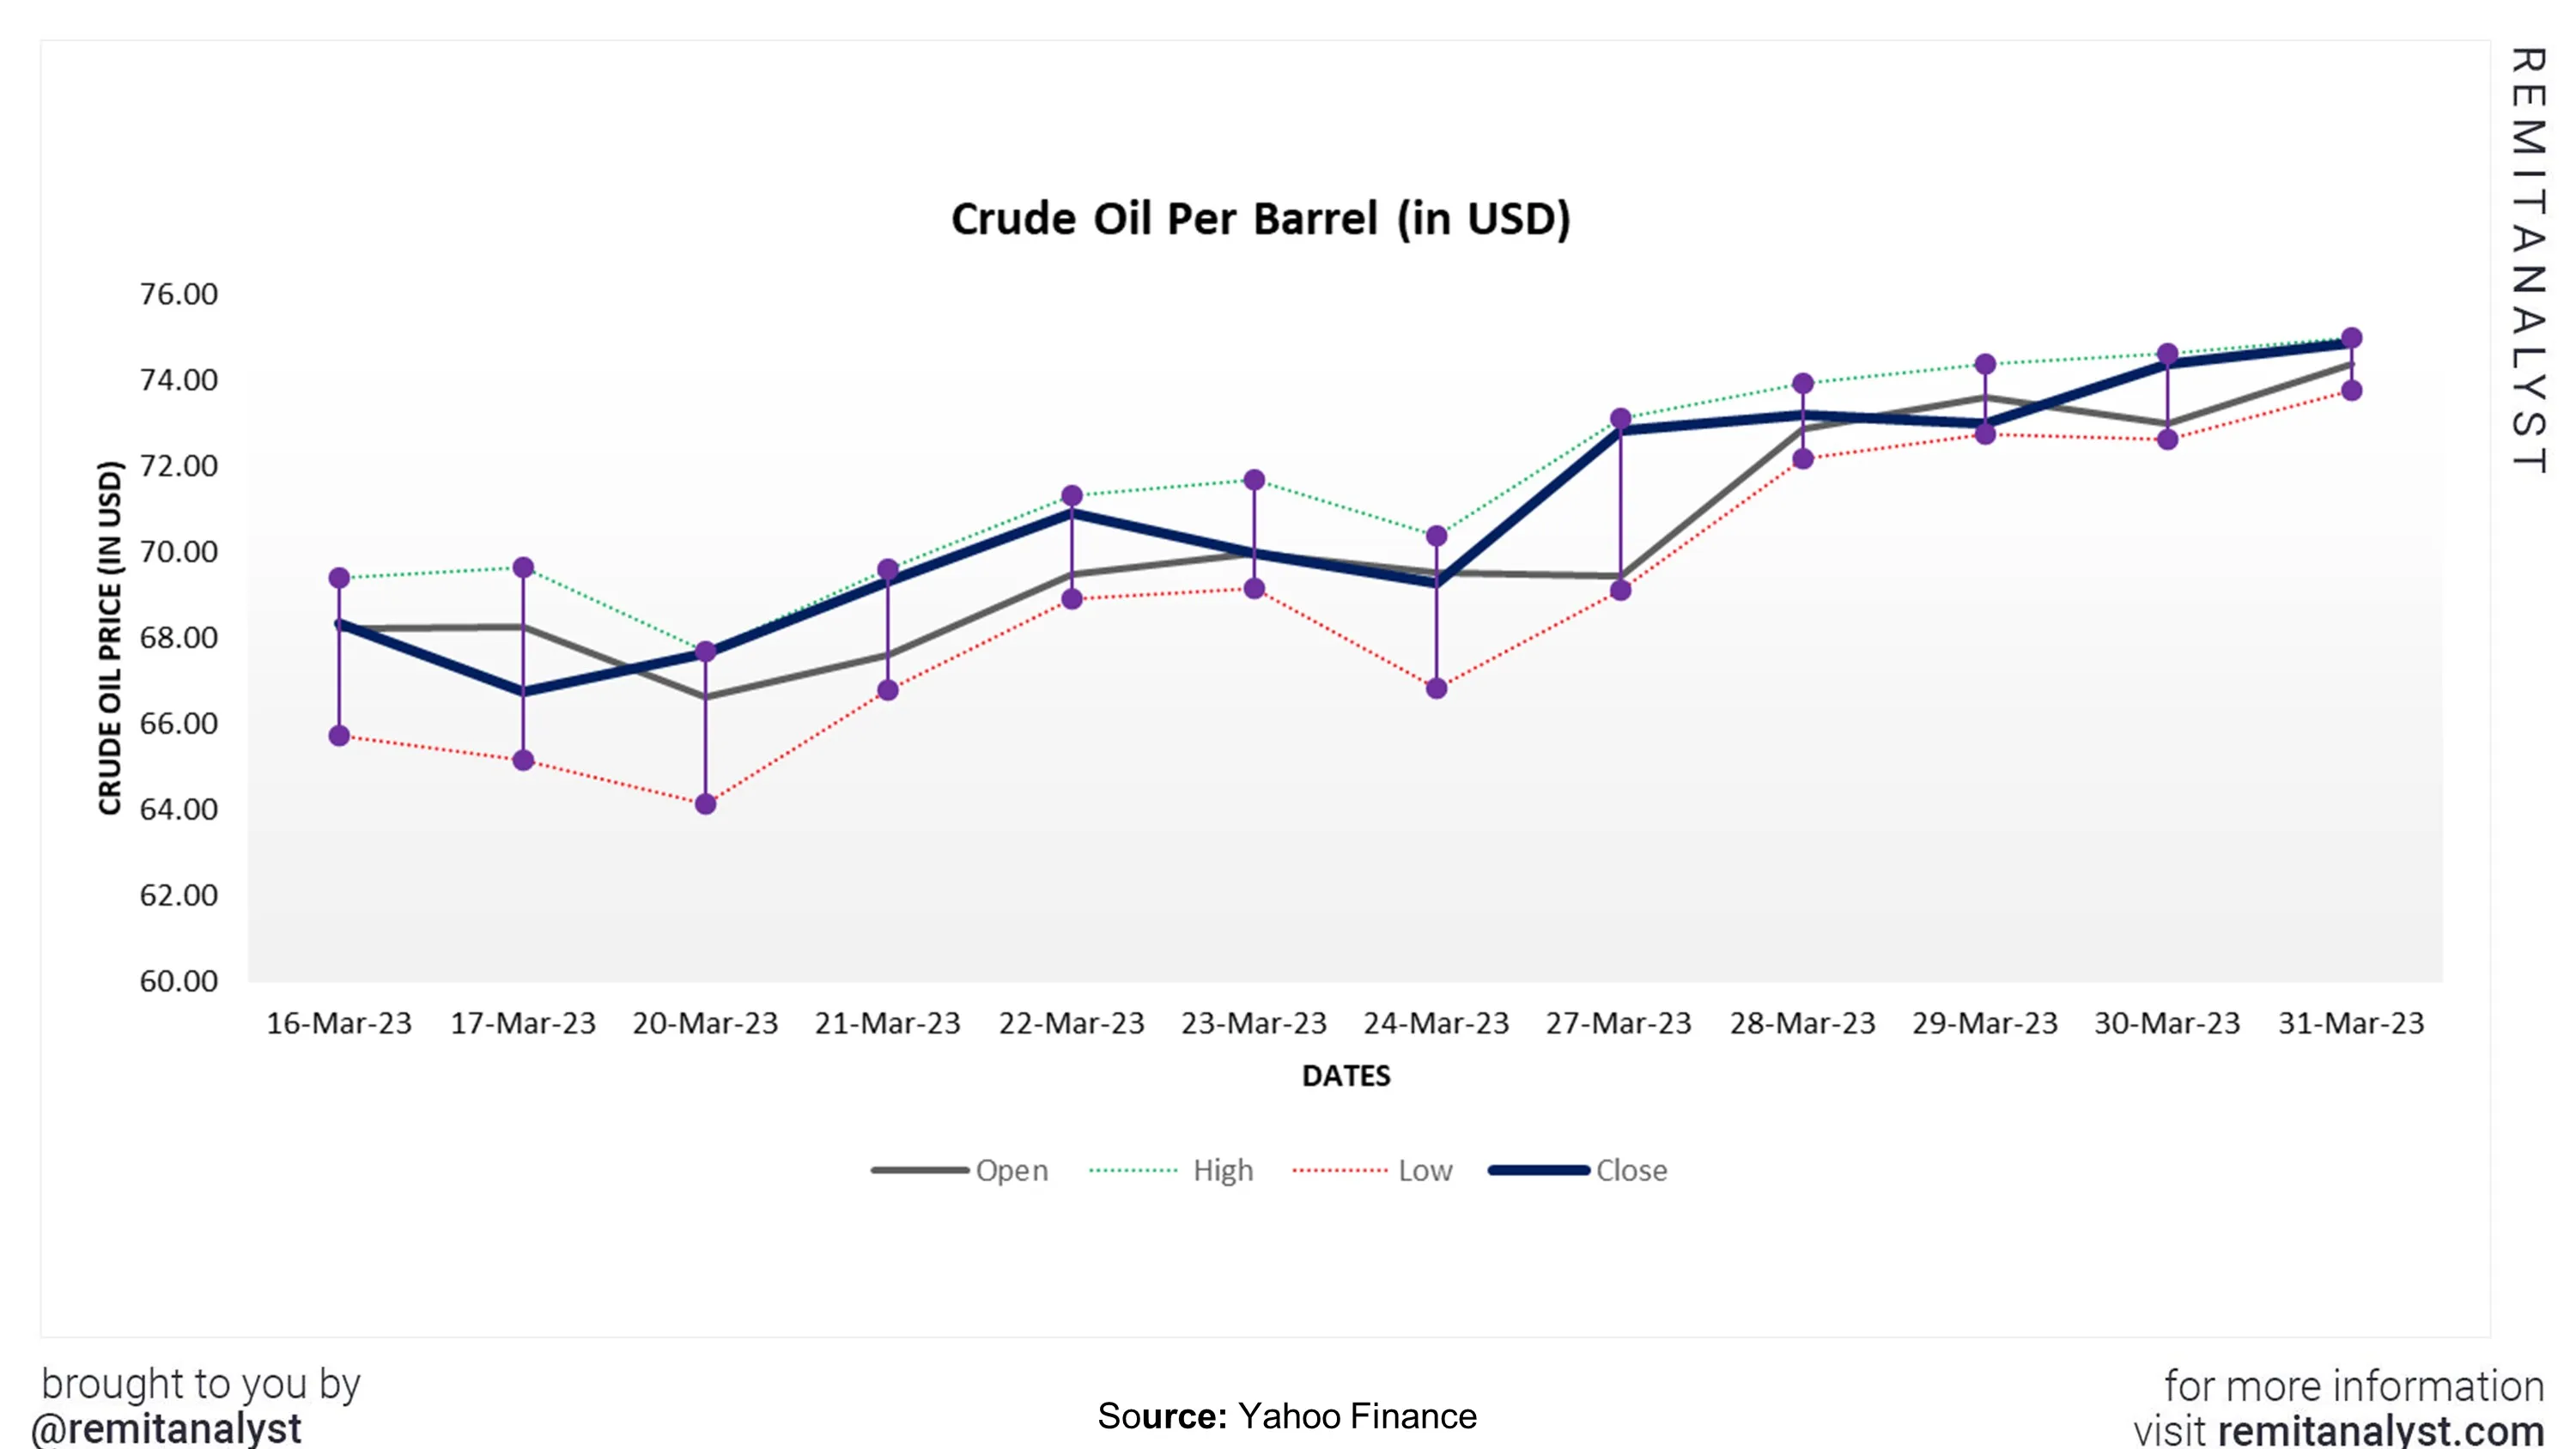 crude-oil-prices-from-16-mar-2023-to-31-mar-2023